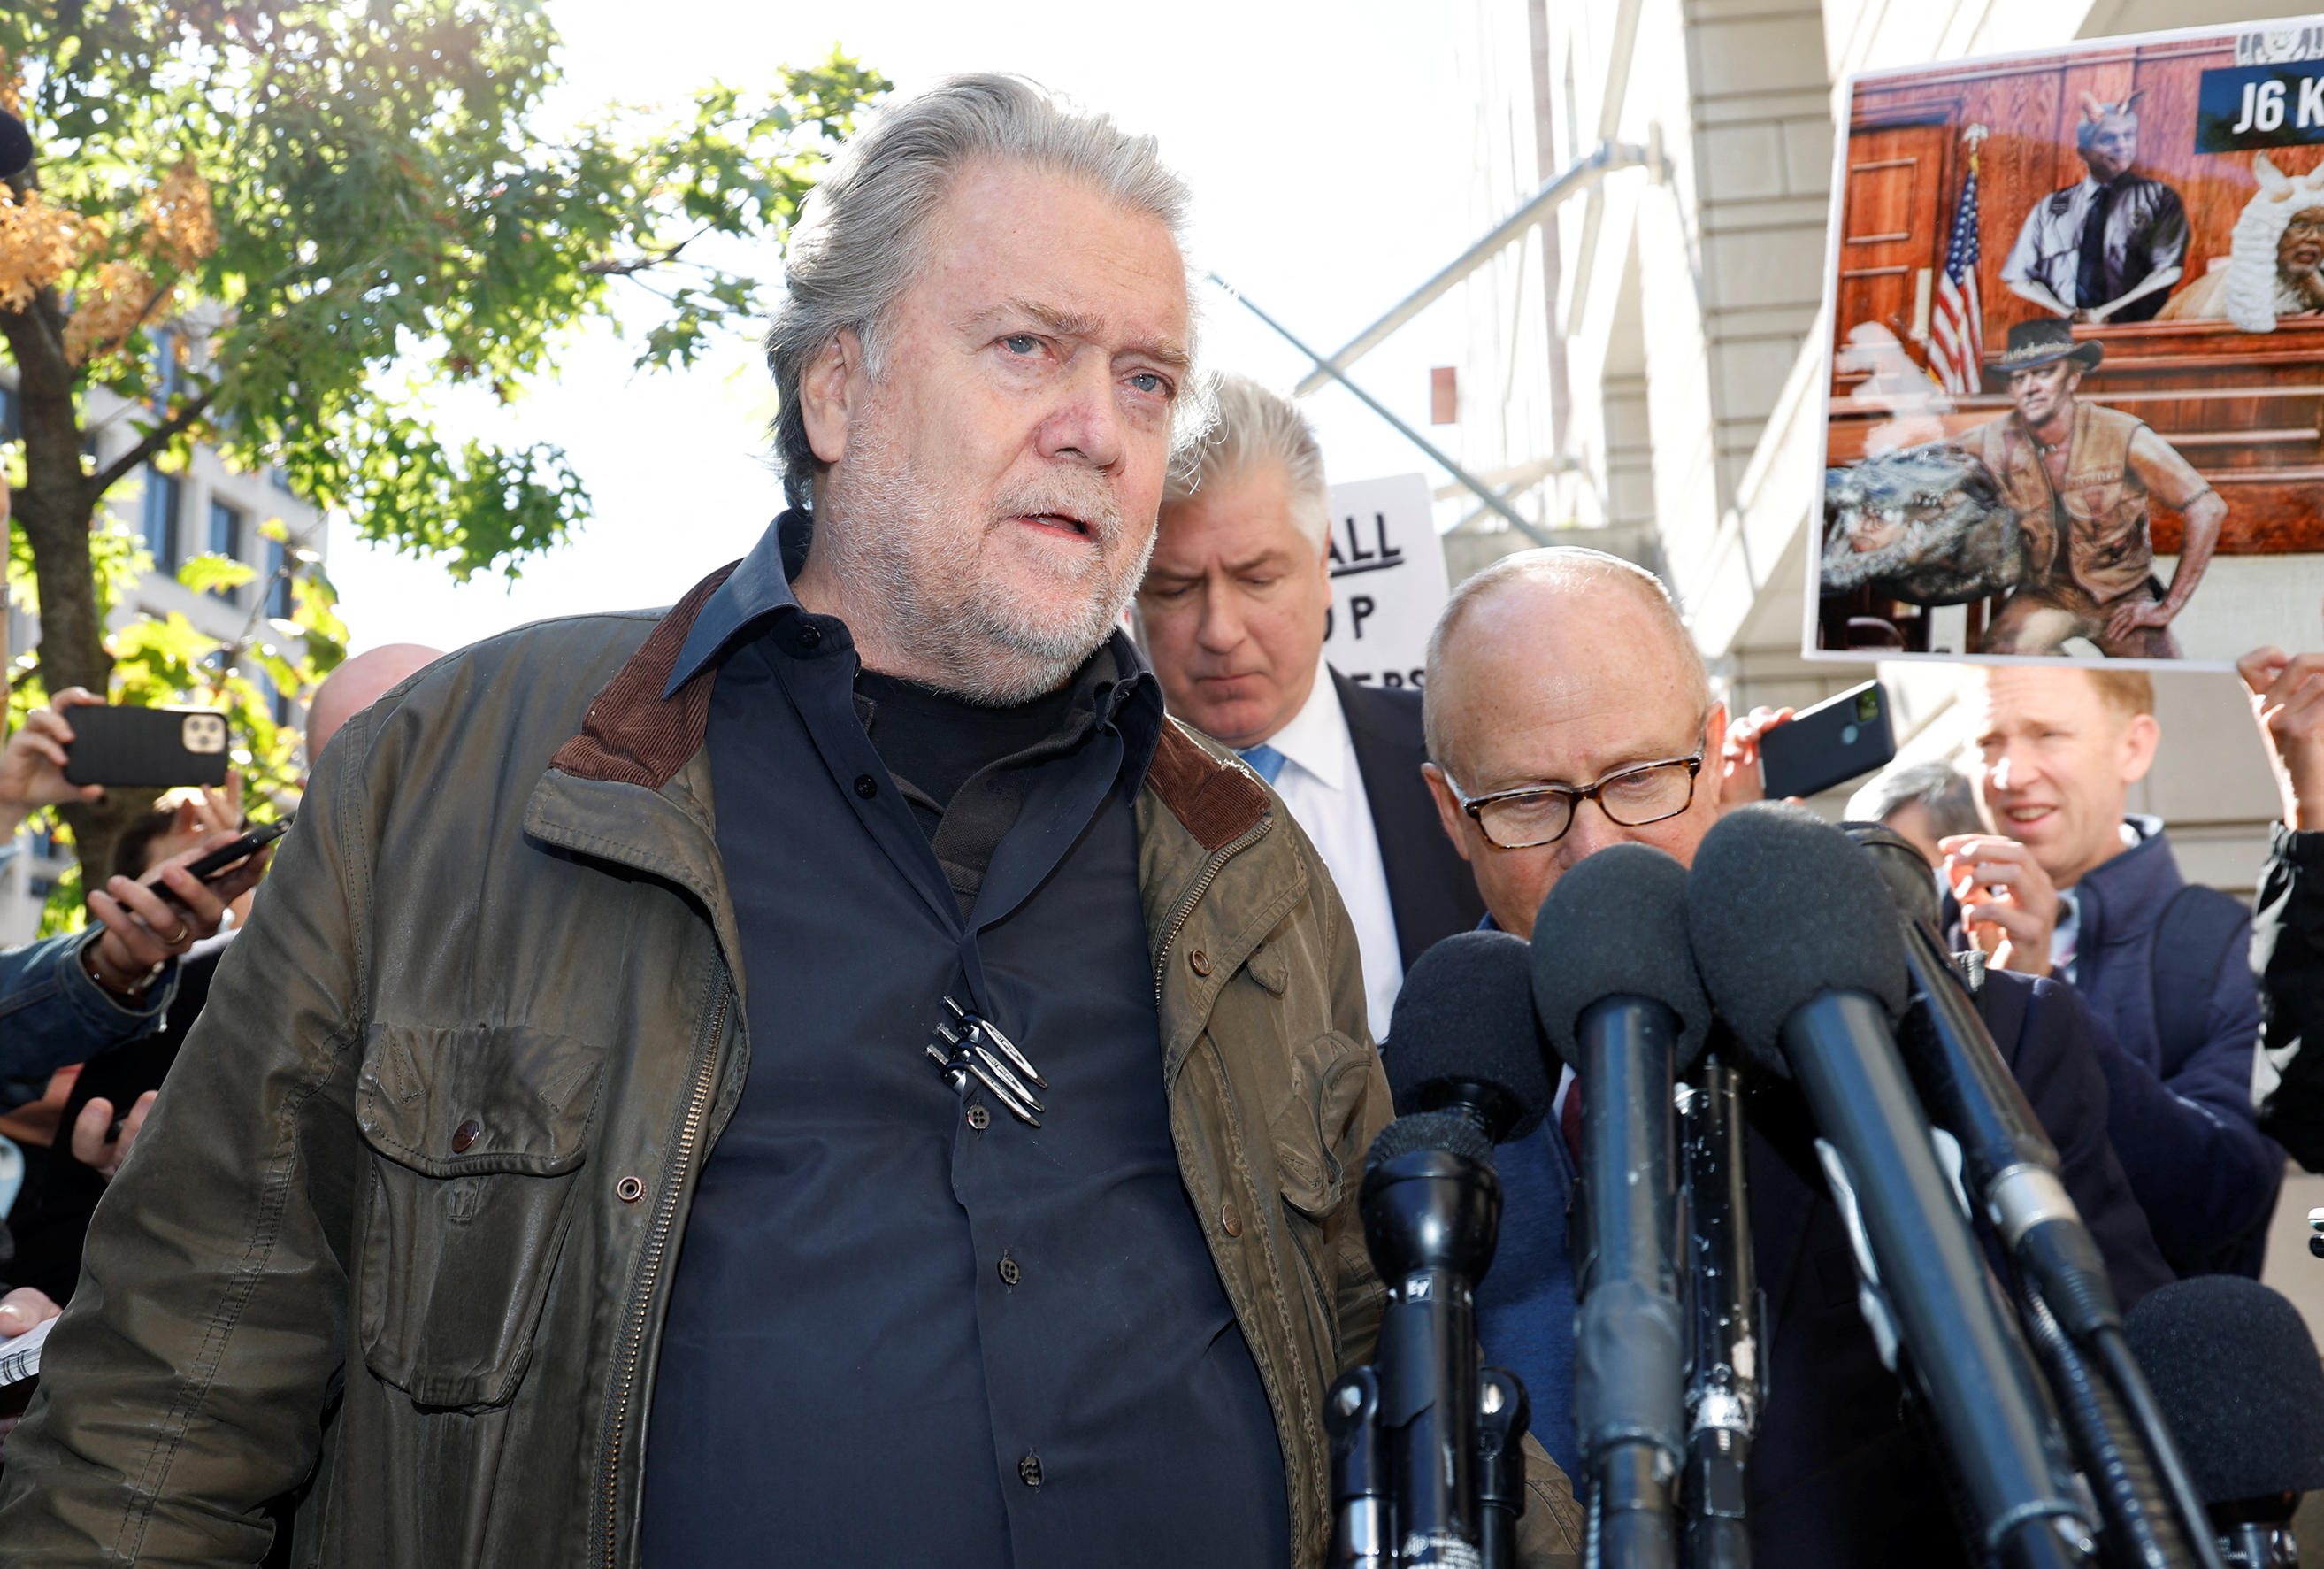 Steve Bannon who was found guilty of contempt of Congress charges in July for refusing a subpoena about the January 6th attack on the U.S. Capitol speaks to reporters after his sentencing hearing at U.S. District Court in Washington, on October 21.